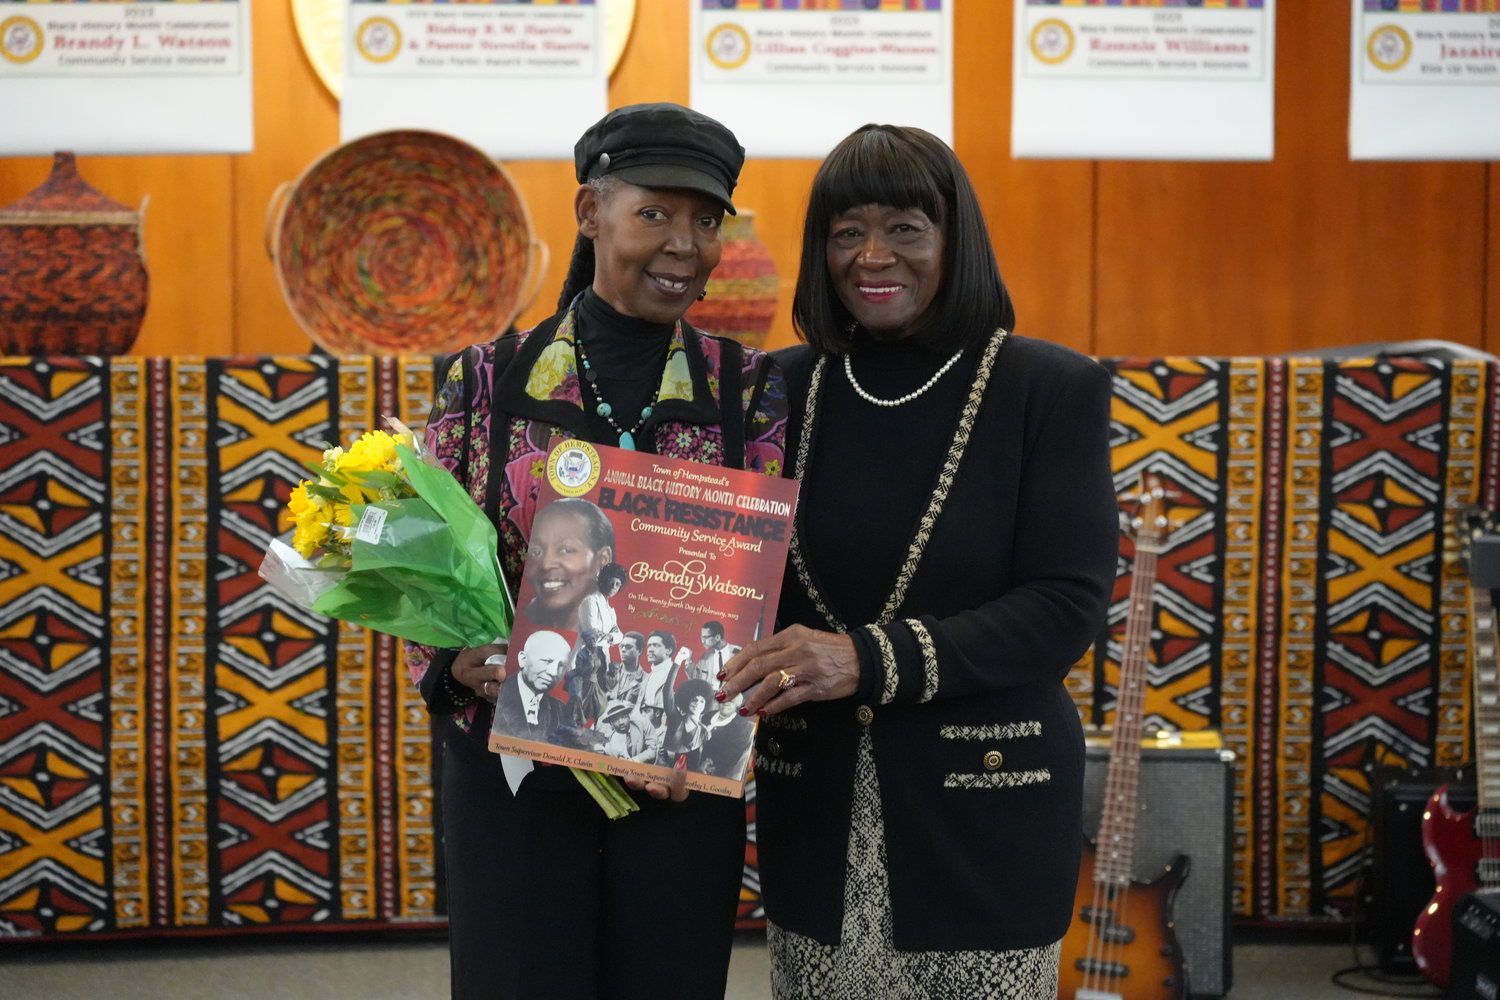 Brandy Watson, left, was one of the several honorees recognized by Hempstead Deputy Town Supervisor Dorothy Goosby for her dedication to community service. Watson is the president and chair of the Hempstead Community Land Trust.